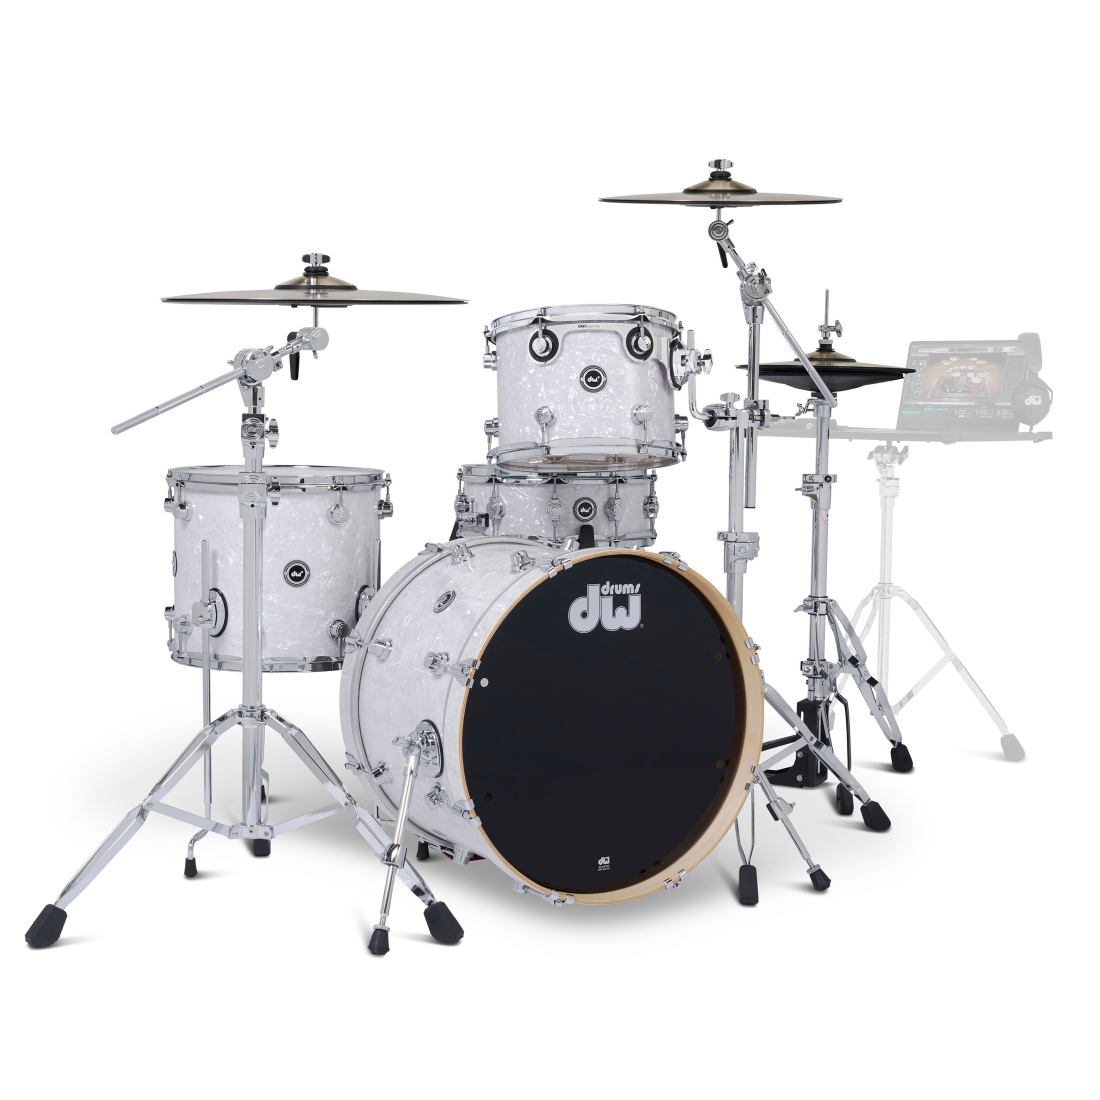 DWe 4-Piece Drumset with Cymbals and Hardware - White Marine Pearl